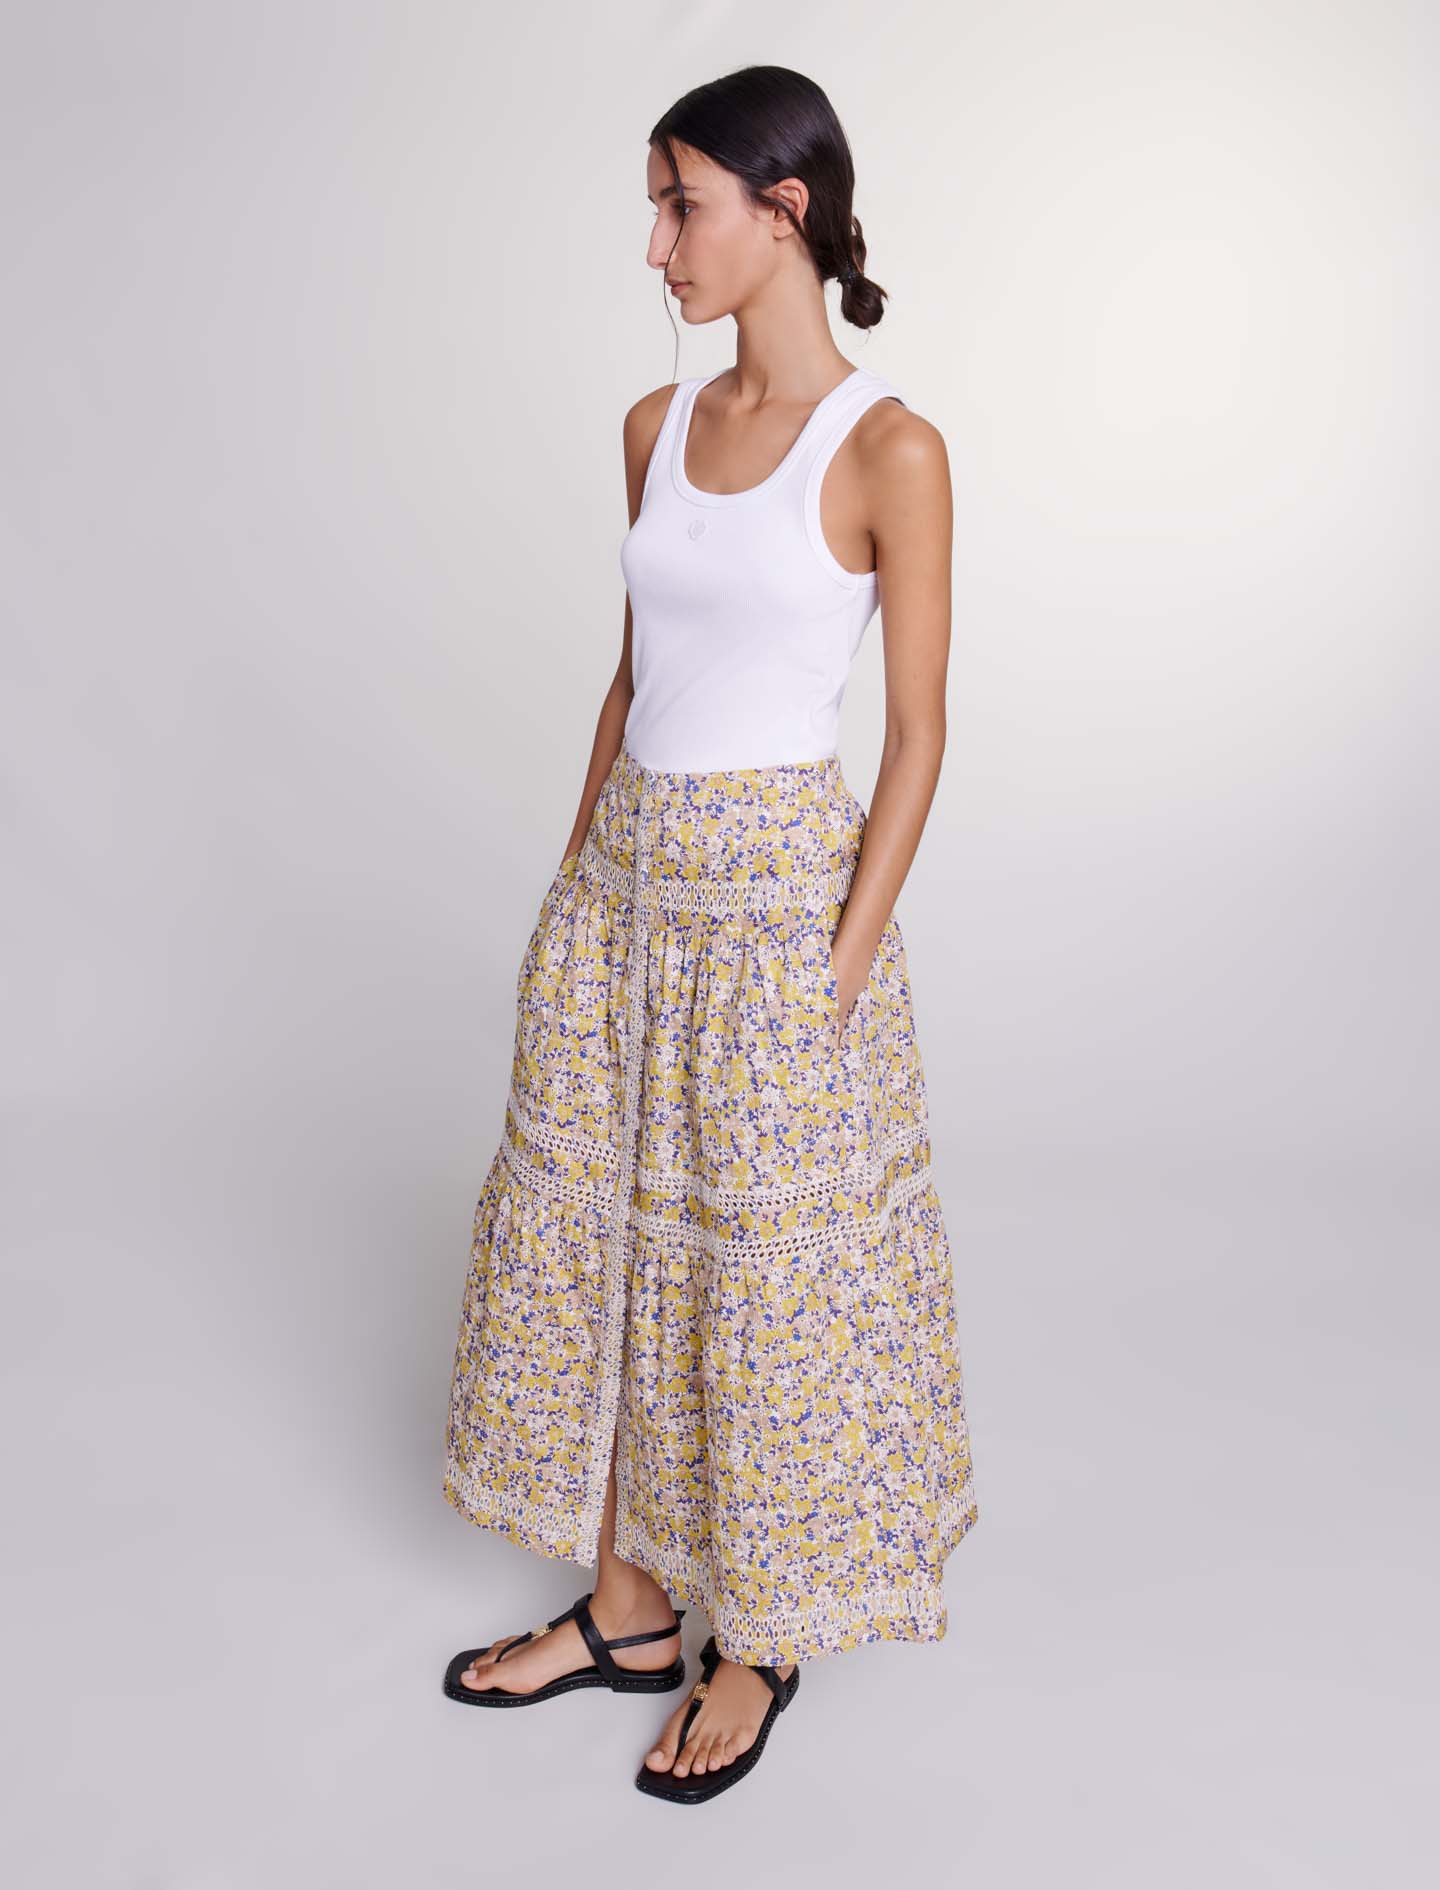 Long Floral Embroidered Skirt - Beige